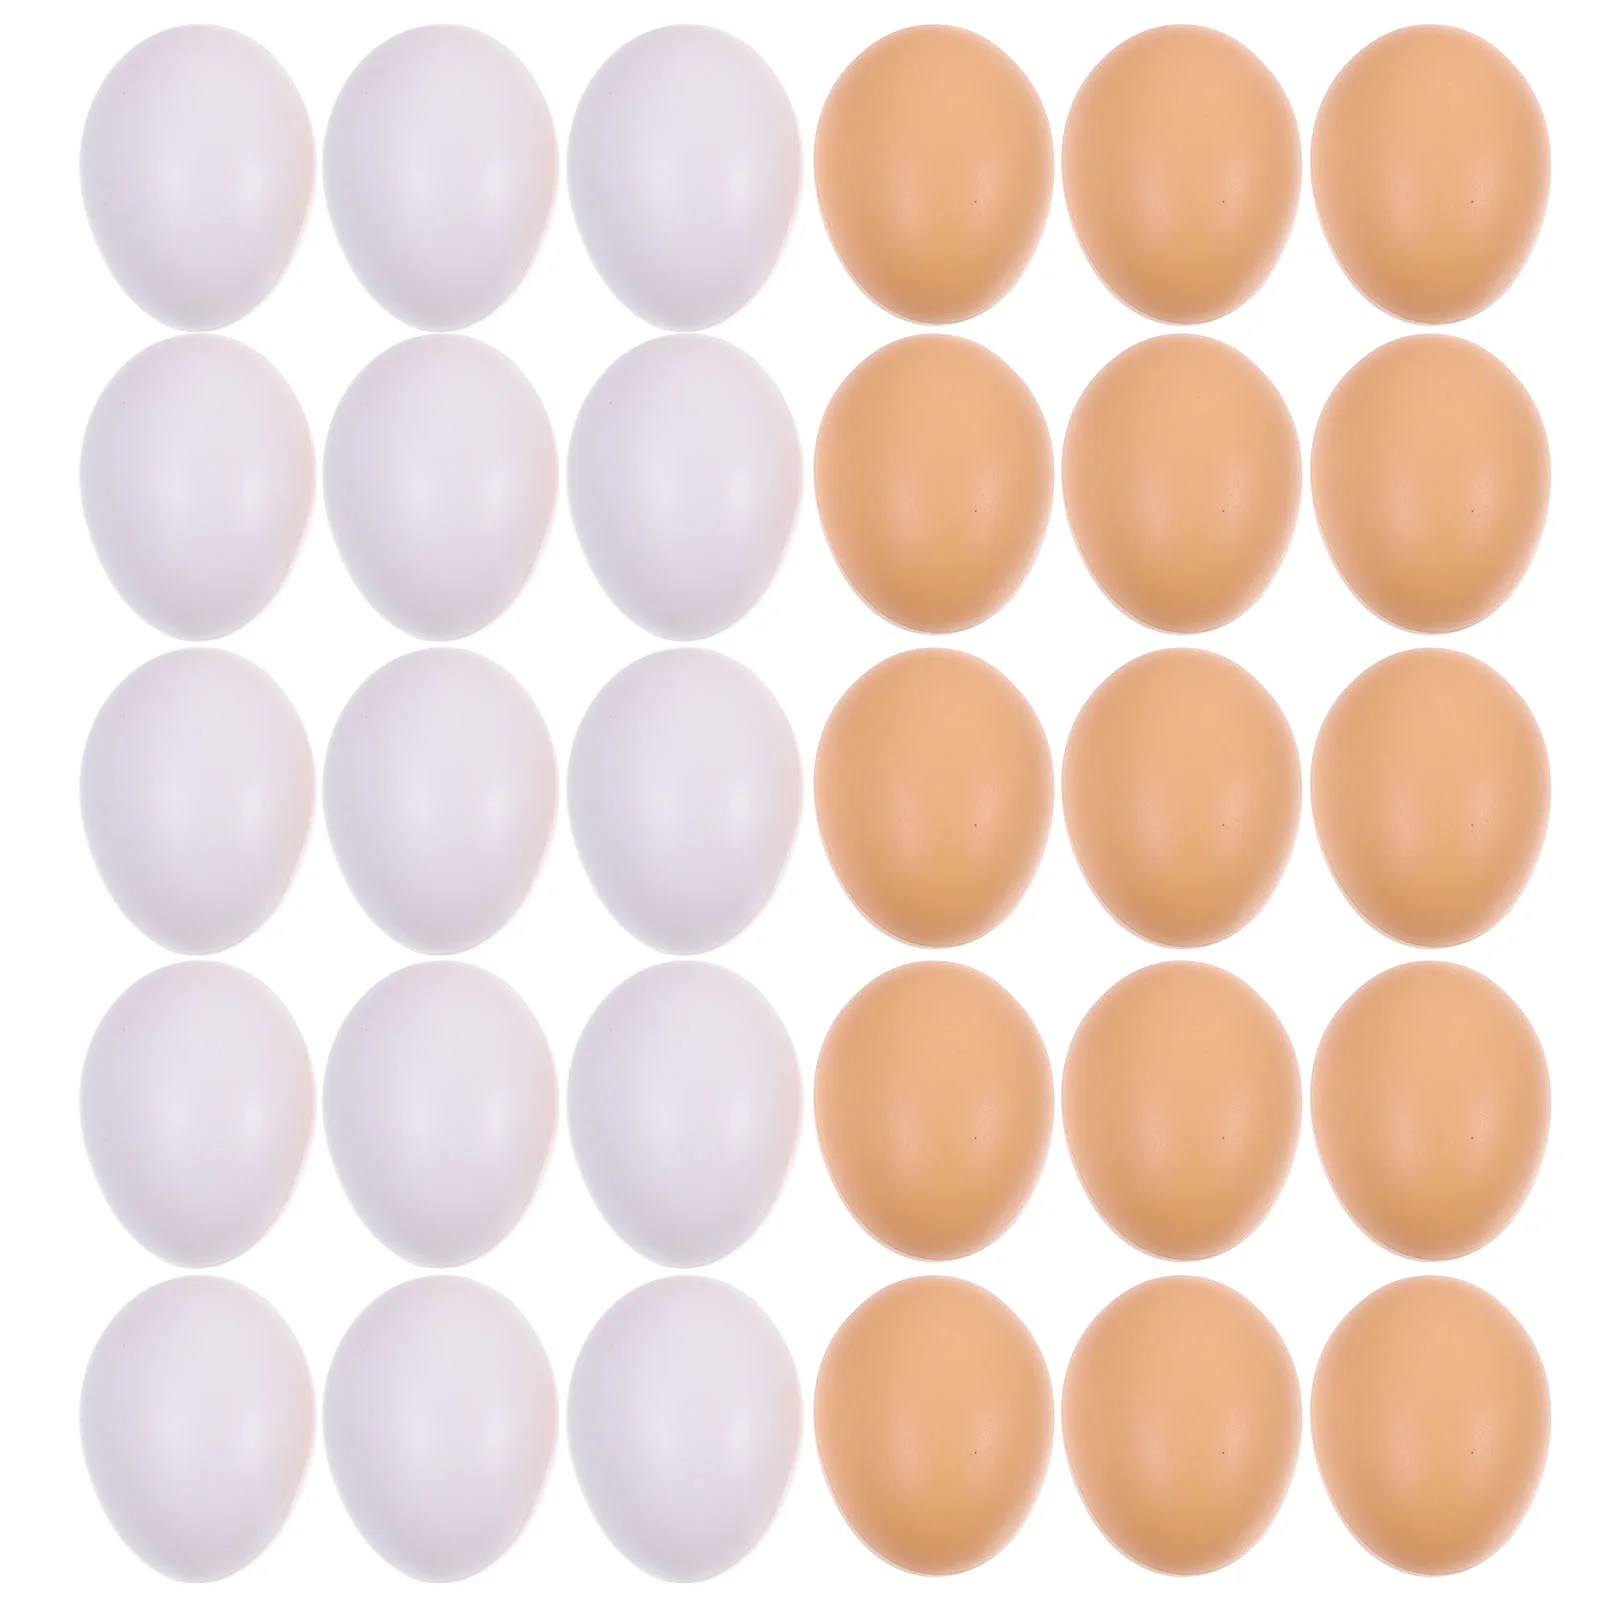 

Eggs Easter Egg Diy Fake Chicken Painting Party Crafts White Artificial Simulation Surprise Blank Craft Toy Toys Decorating